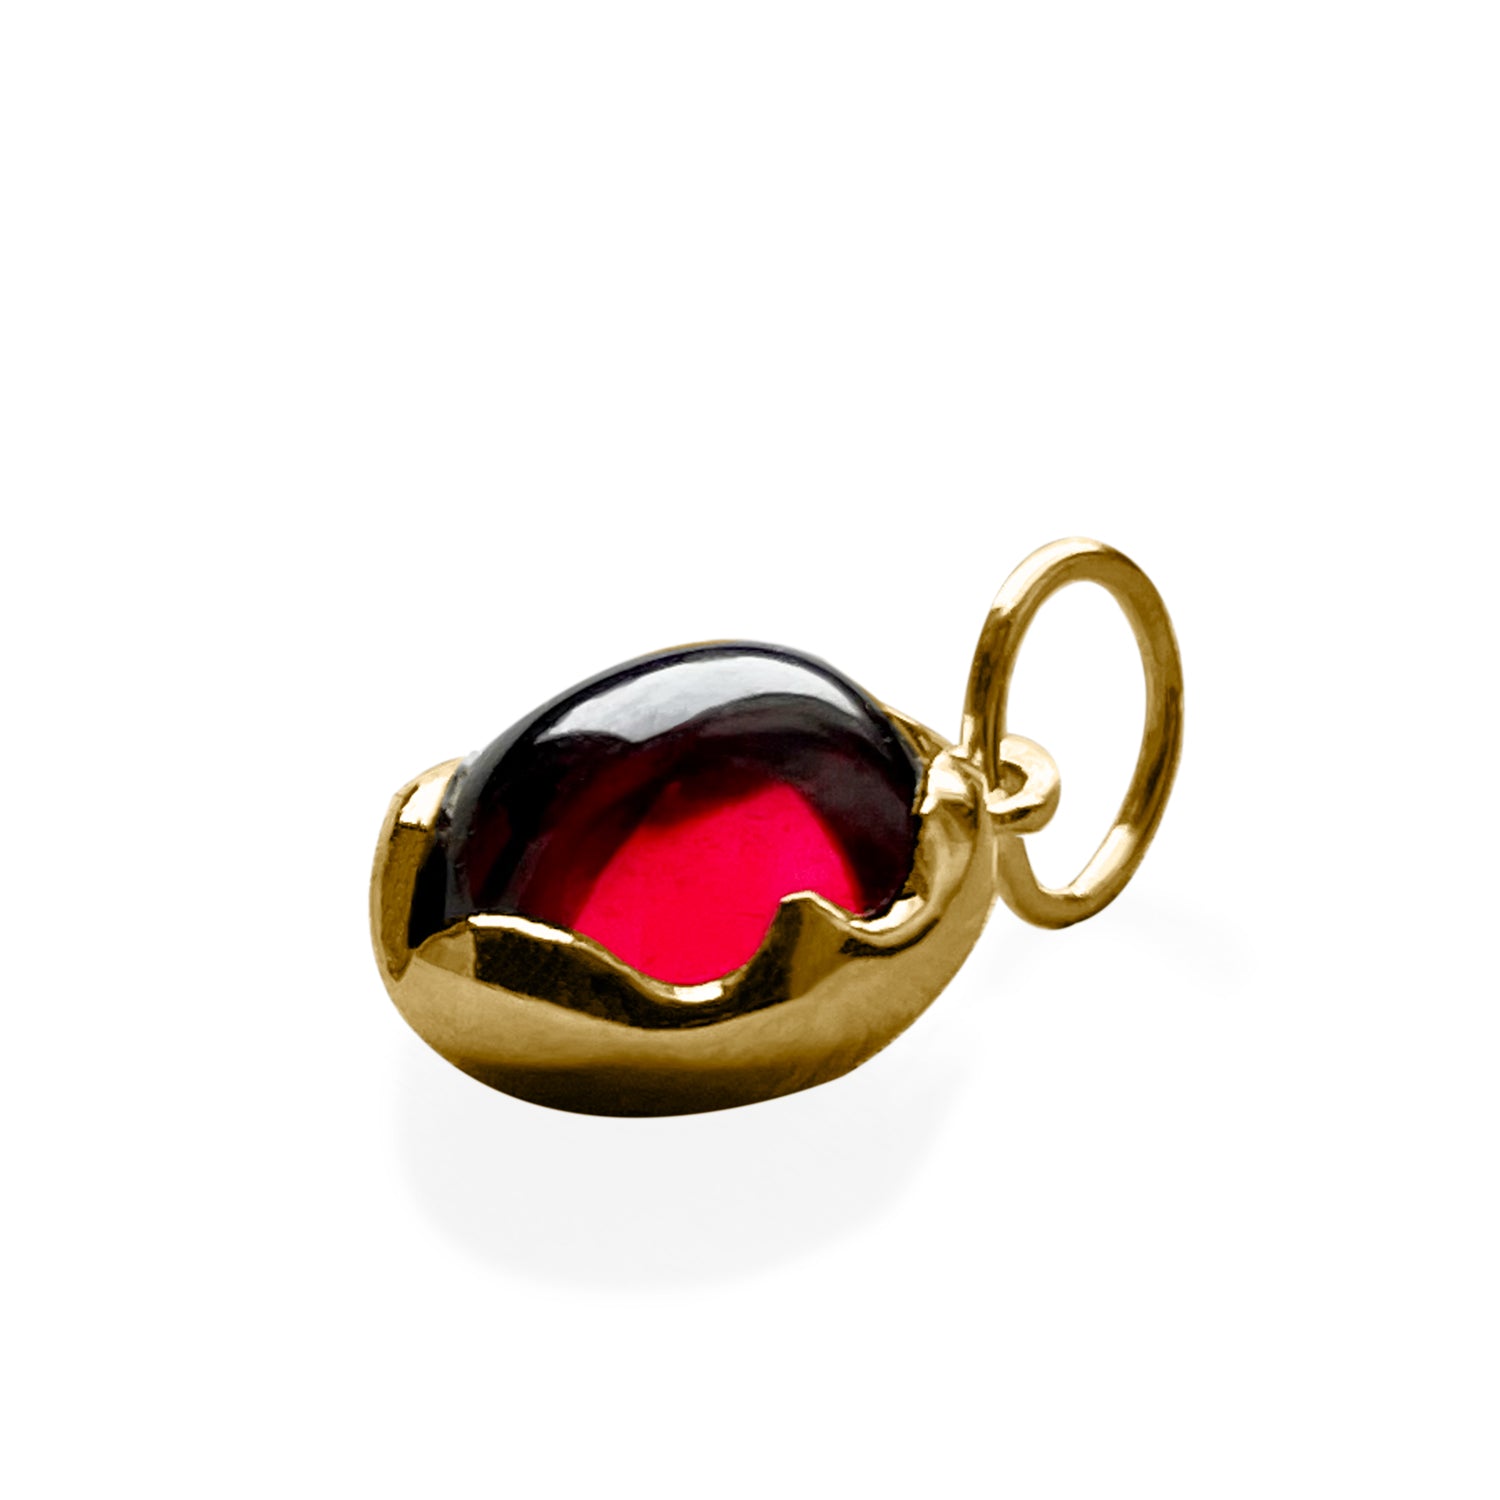 sideway view of the red garnet Lotus charm, witrh the light going through the red cabochon gem